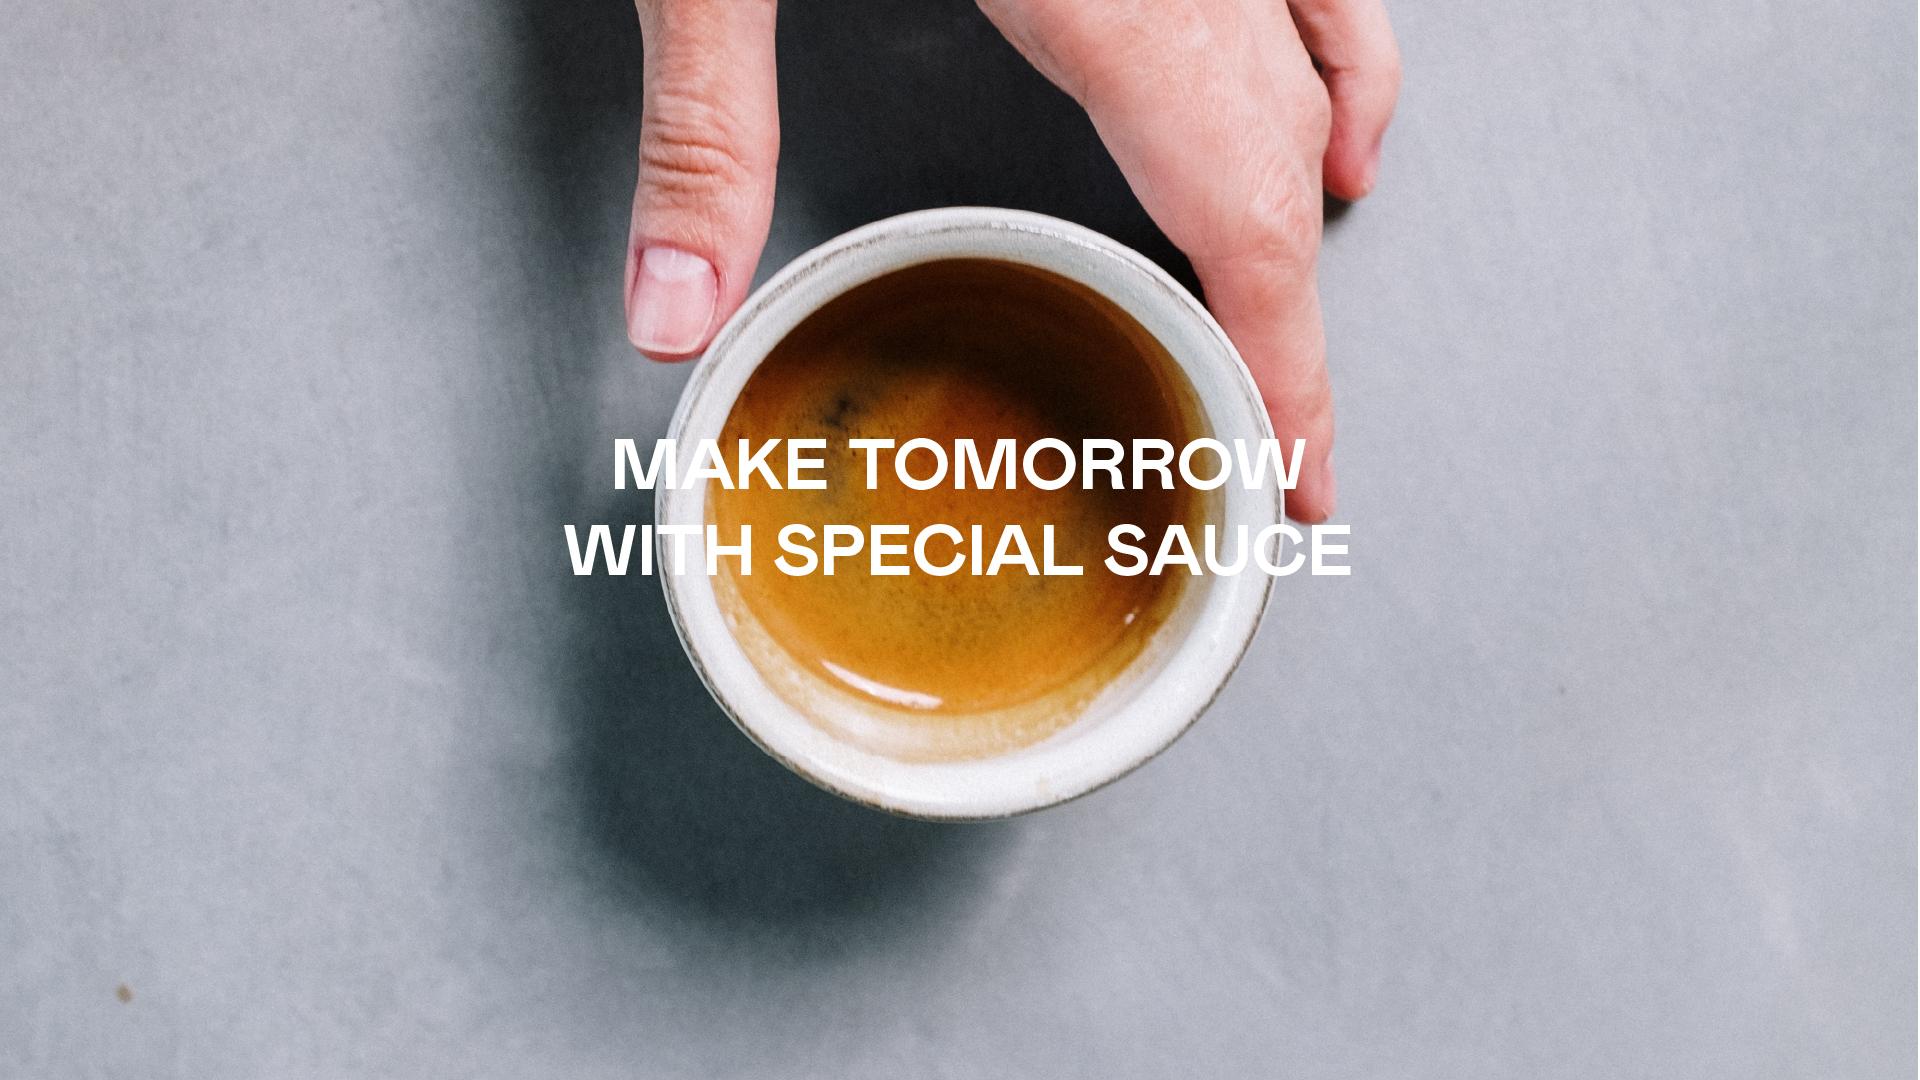 Special sauce